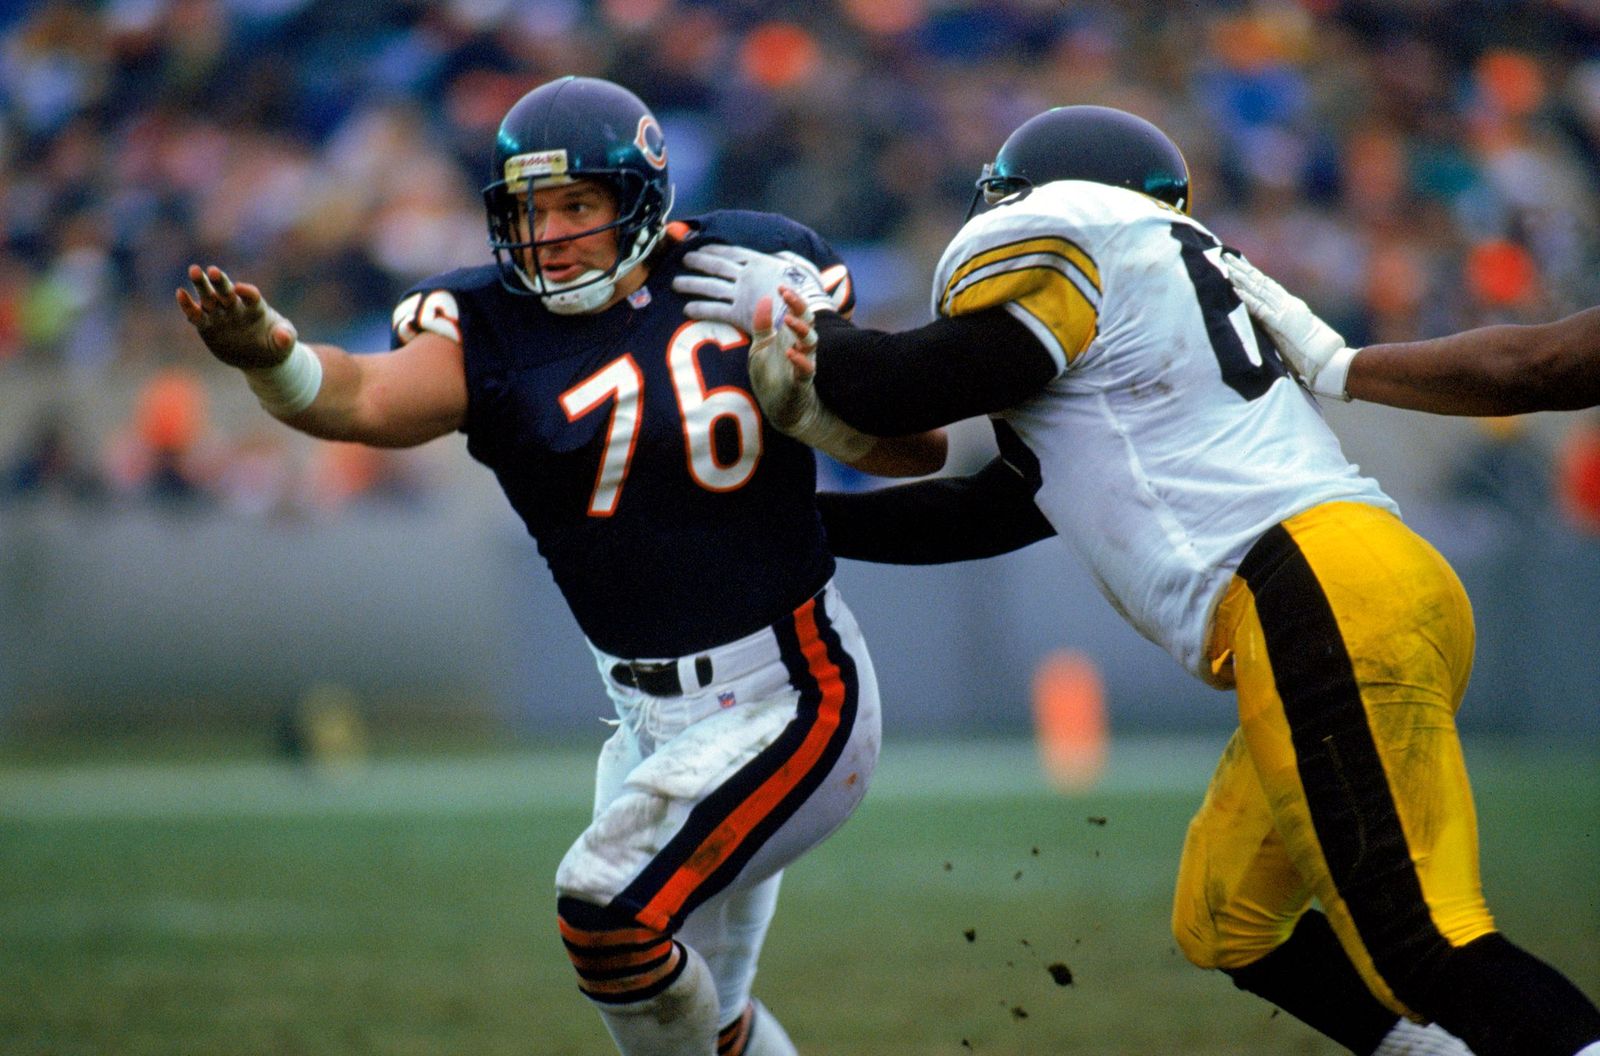 Steve McMichael playing during the game against the Pittsburgh Steelers on December 13, 1992 in Chicago, Illinois. | Getty Images